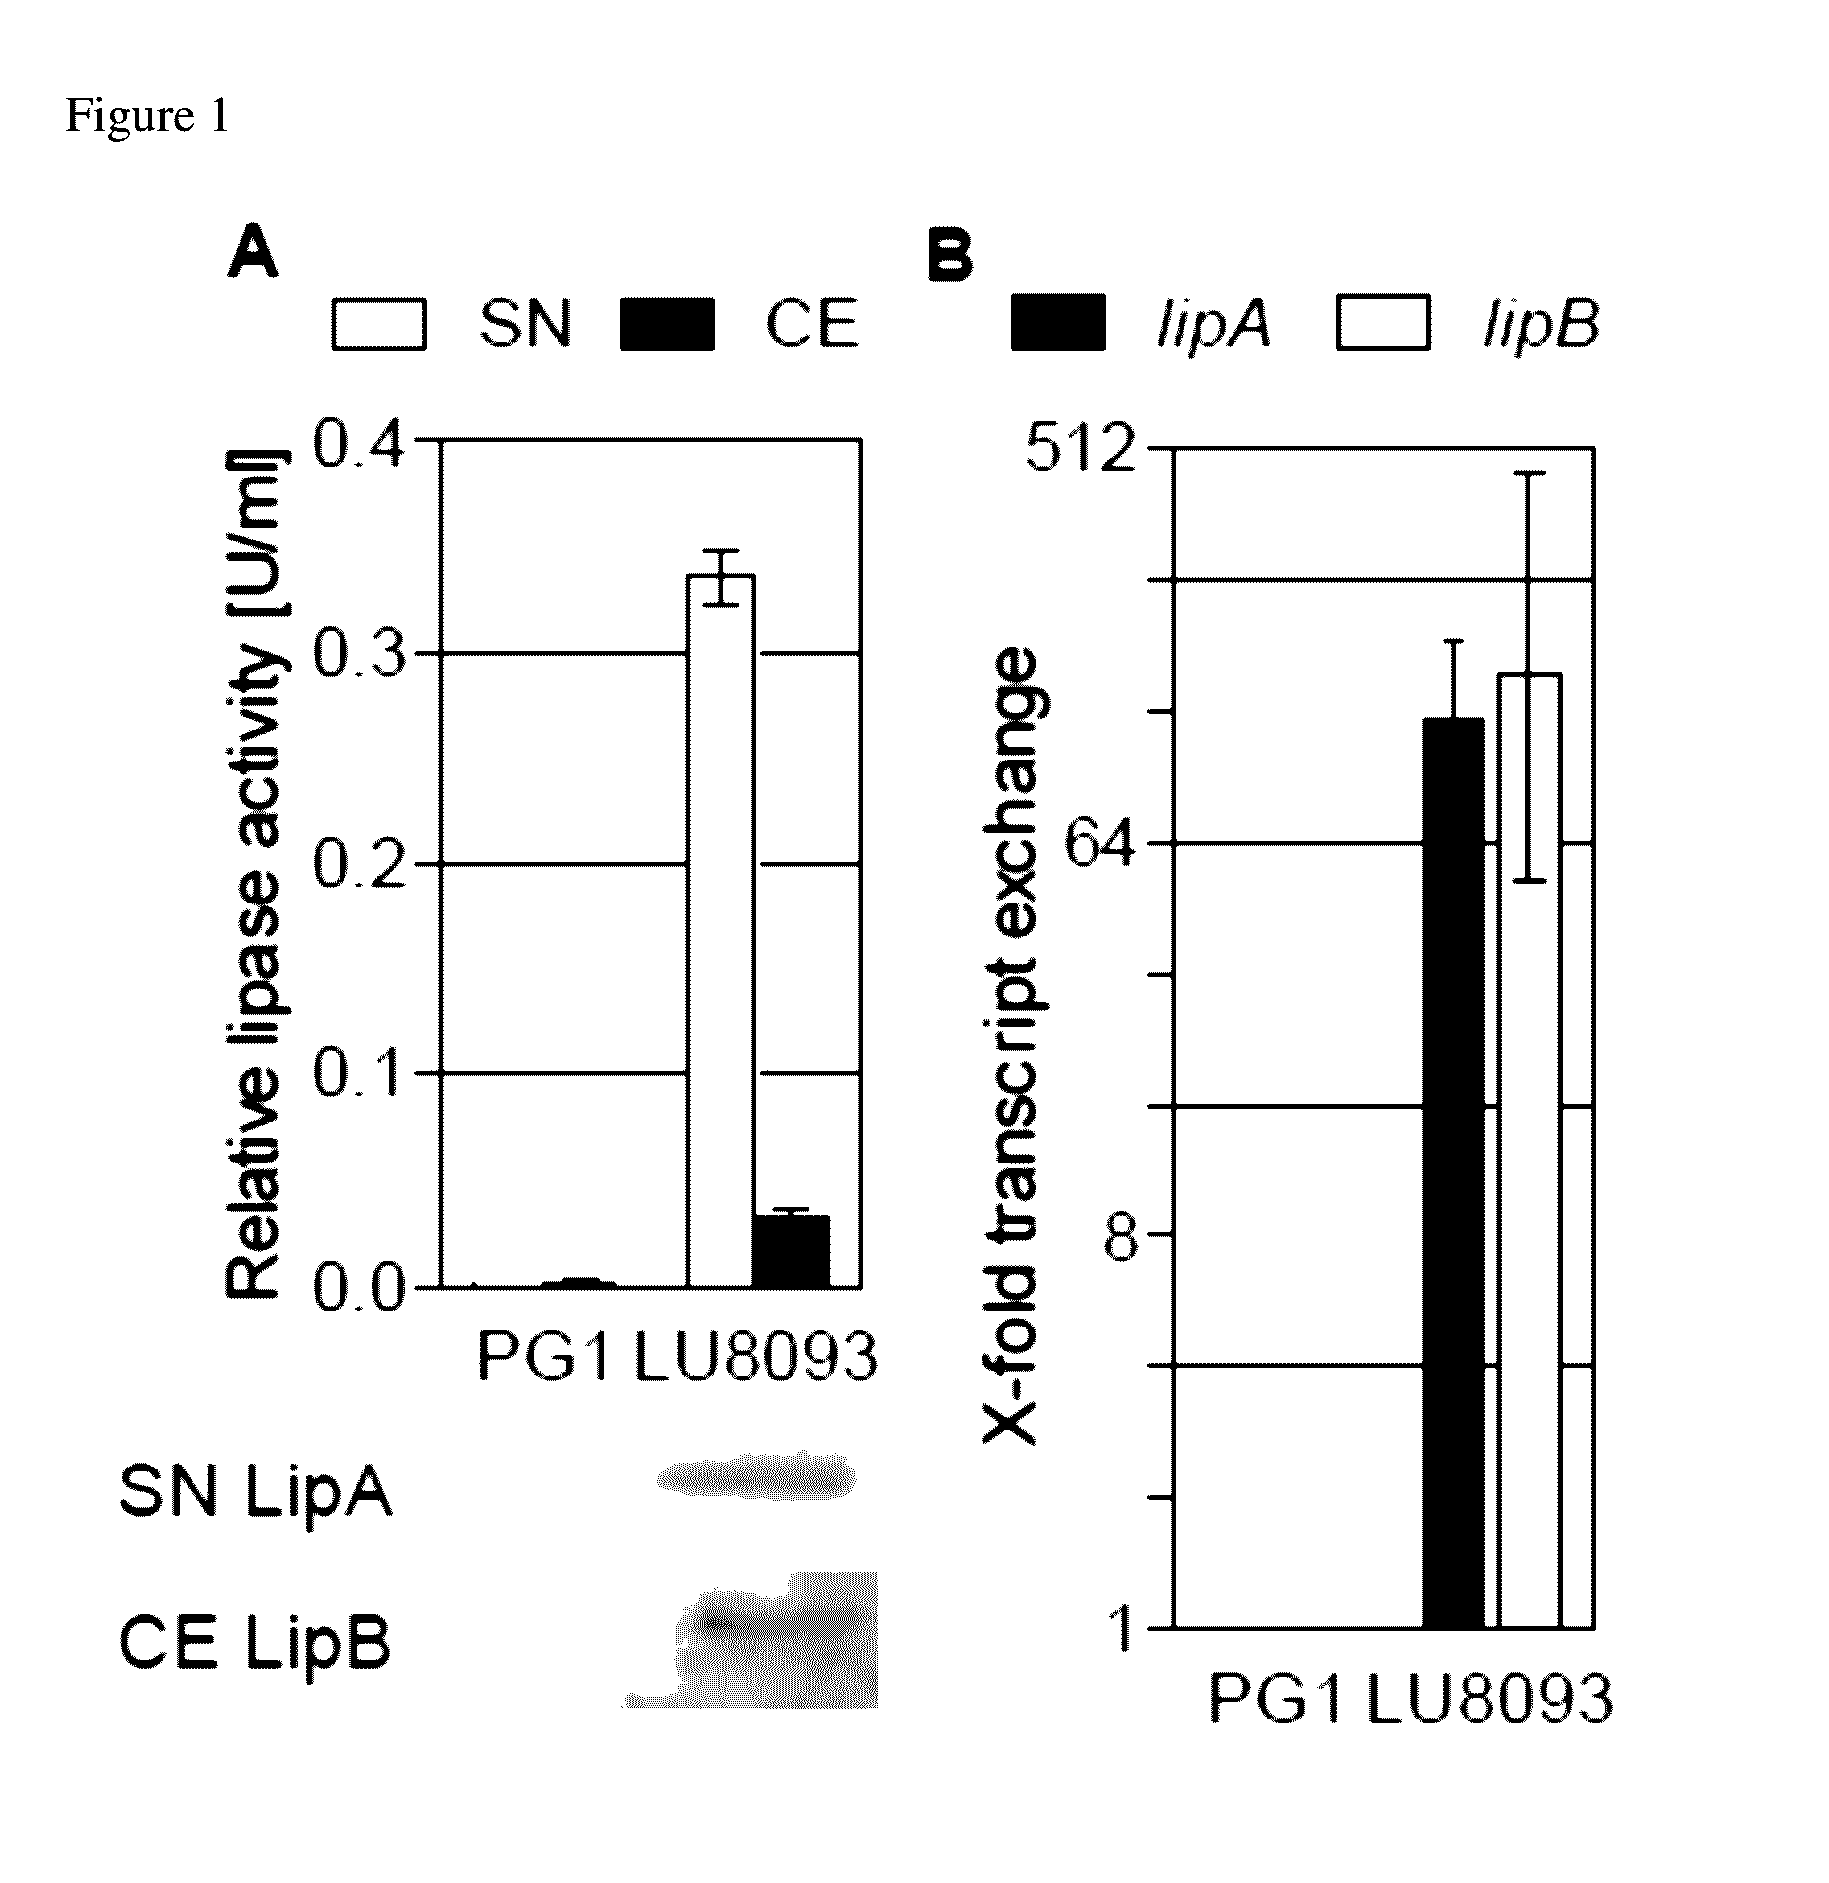 Nucleic acid molecules for increased protein production